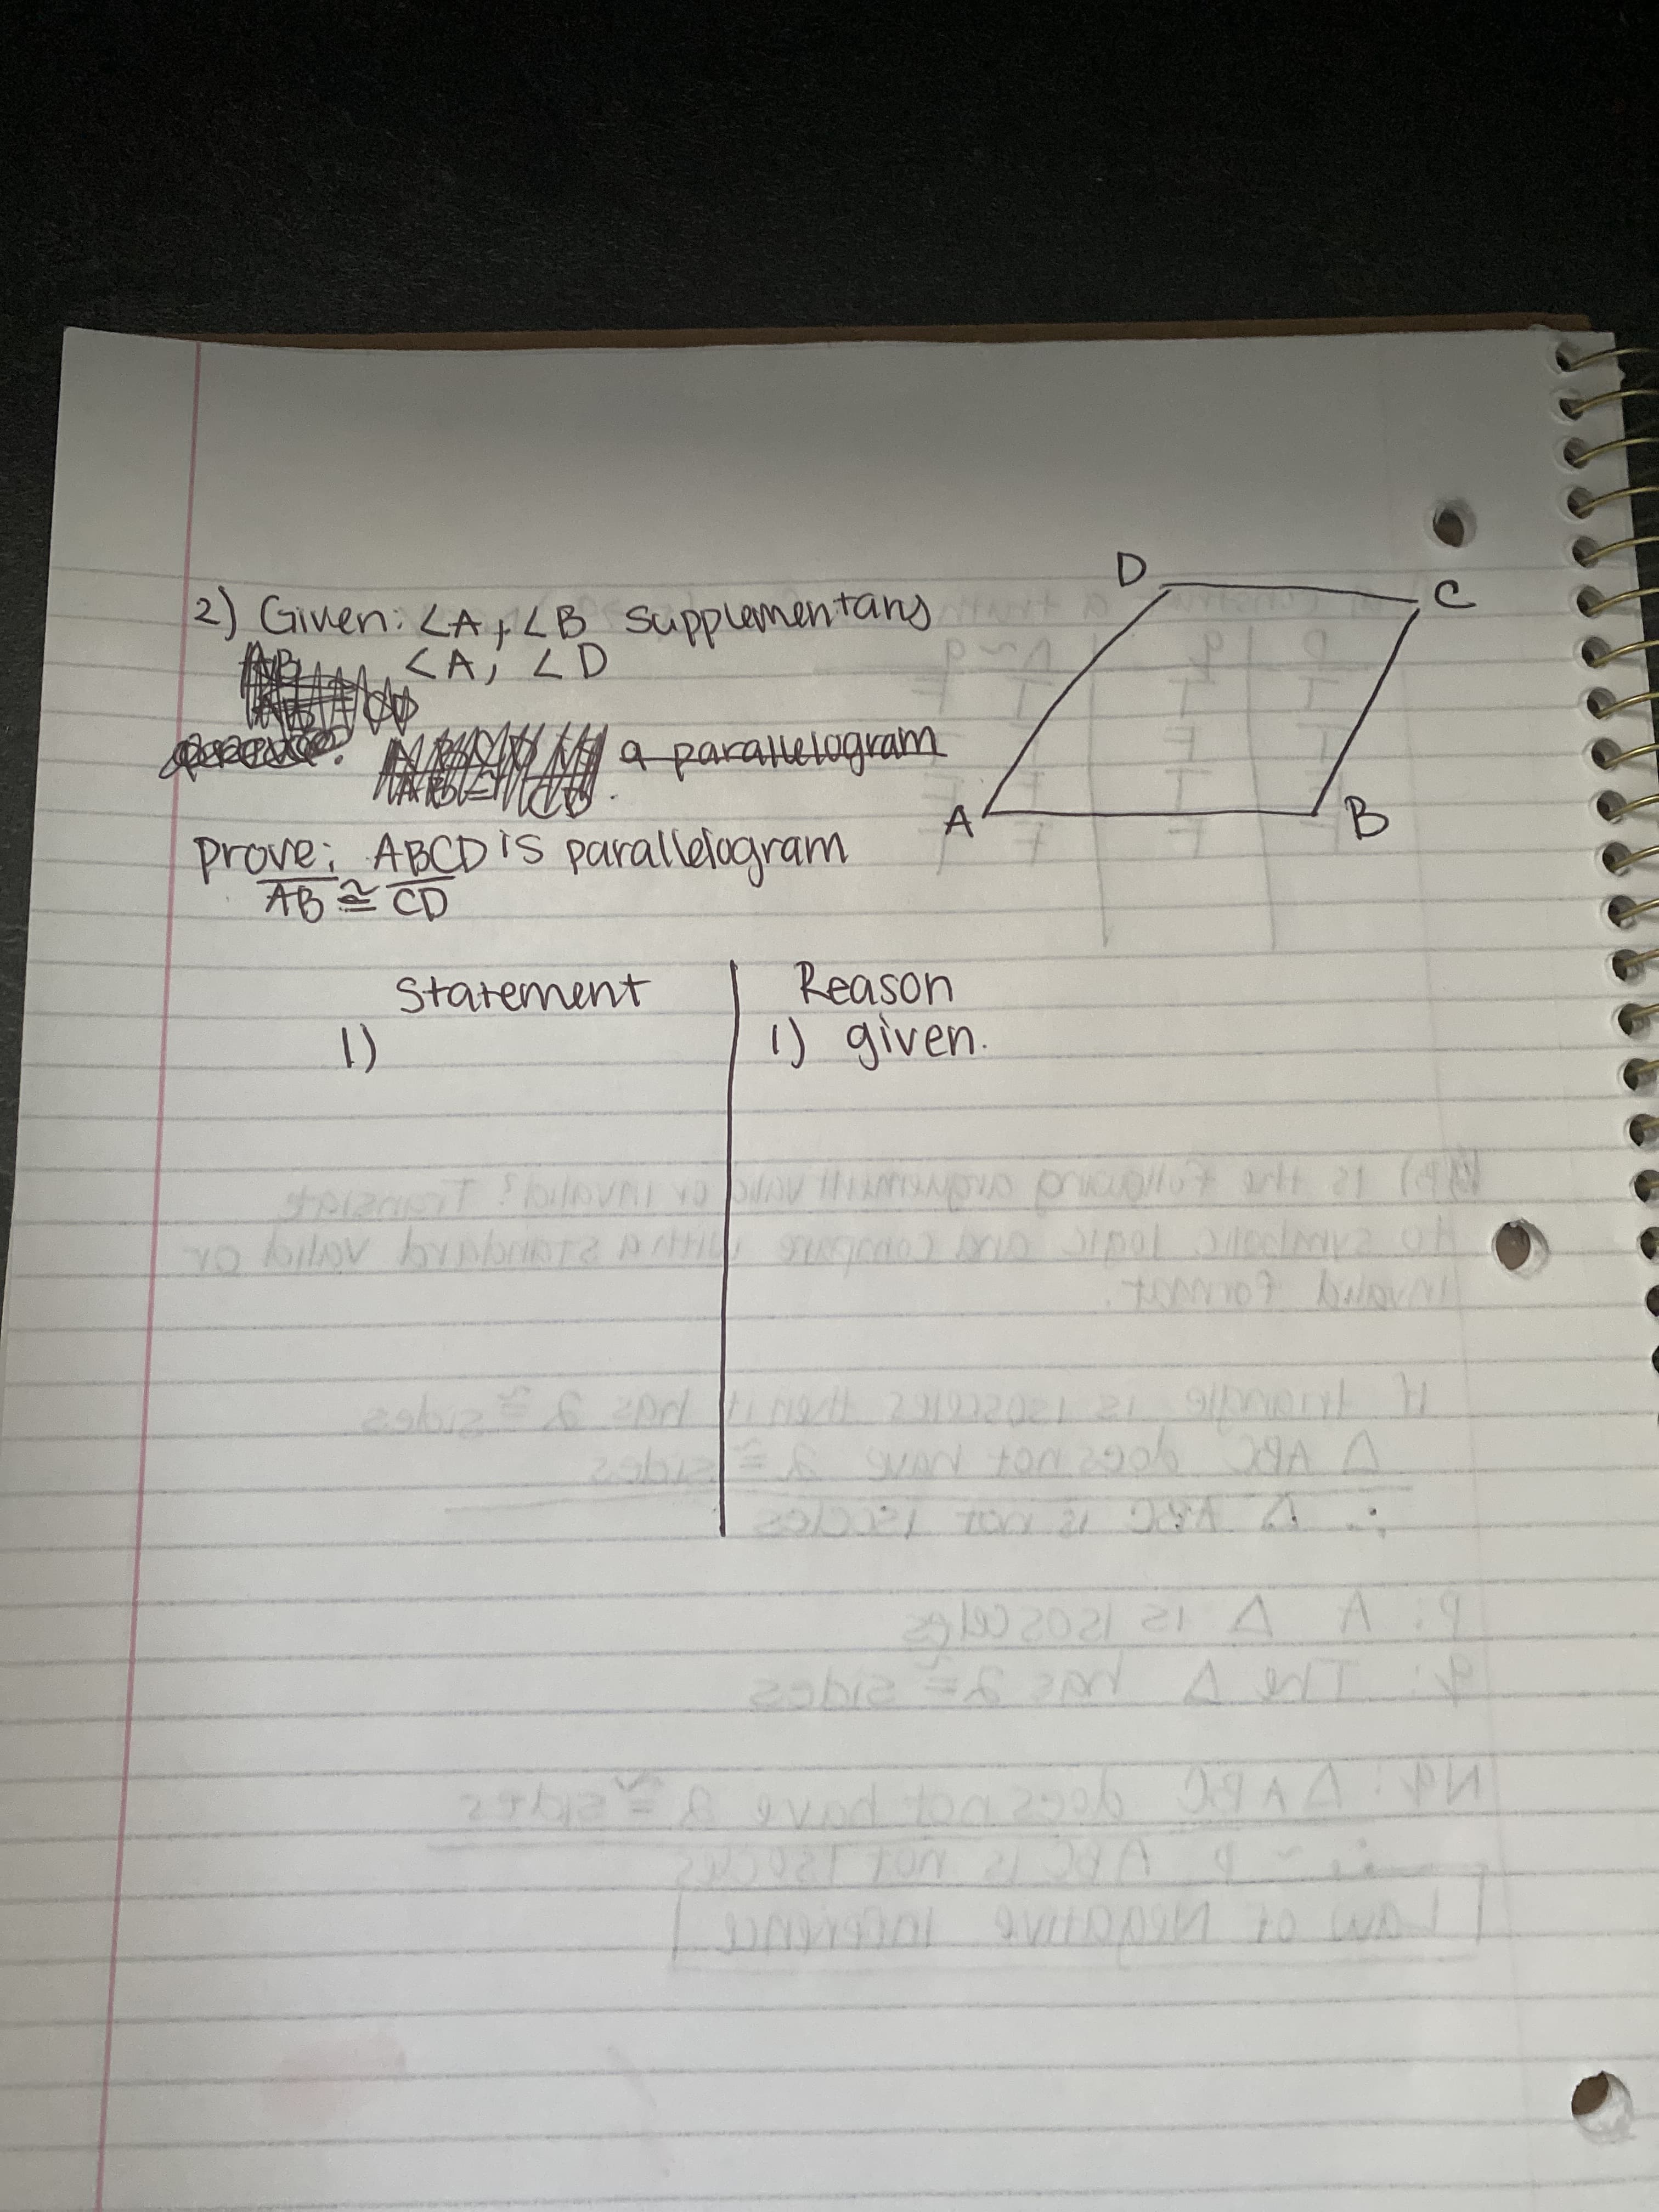 **Proving Parallelograms: Example Problem**

In this example, we are given certain angle relationships and are asked to prove that a quadrilateral is a parallelogram based on these relationships.

**Problem Statement:**

Given:
1. \( \angle A \) and \( \angle B \) are supplementary.
2. \( \angle A \) is adjacent to \( \angle D \).

To Prove: \( ABCD \) is a parallelogram, given that \( AB \cong CD \) (AB is congruent to CD).

**Diagram Explanation:**

On the right side of the notebook sheet, there is a diagram of the quadrilateral ABCD. Here is a breakdown of the diagram:

- Quadrilateral \(ABCD\) is drawn, indicating points \(A\), \(B\), \(C\), and \(D\).
- Sides \(AB\) and \(CD\) are marked to indicate that they are equal in length (denoted by the congruency symbol \( \cong \)).

**Proof Structure:**

A two-column proof structure will be used to demonstrate this mathematical proof. The two columns will be labeled "Statement" and "Reason" respectively.

```
| Statement | Reason |
|-----------|--------|
| 1)        | 1) given |
```

**Explanation:**

1. The given information forms the basis of the proof.
2. \( \angle A \) and \( \angle B \) are supplementary, meaning their sum is 180 degrees.
3. \( \angle A \) is adjacent to \( \angle D \).

Using these angle relationships and the property that opposite sides of a parallelogram are equal in length, we will show that \( ABCD \) must be a parallelogram.

**Note:**
This problem and proof are intended for educational purposes to illustrate how angle and side relationships can be used to determine that a quadrilateral is a parallelogram. Further steps and justifications (not shown here) would complete the proof in a typical classroom setting.